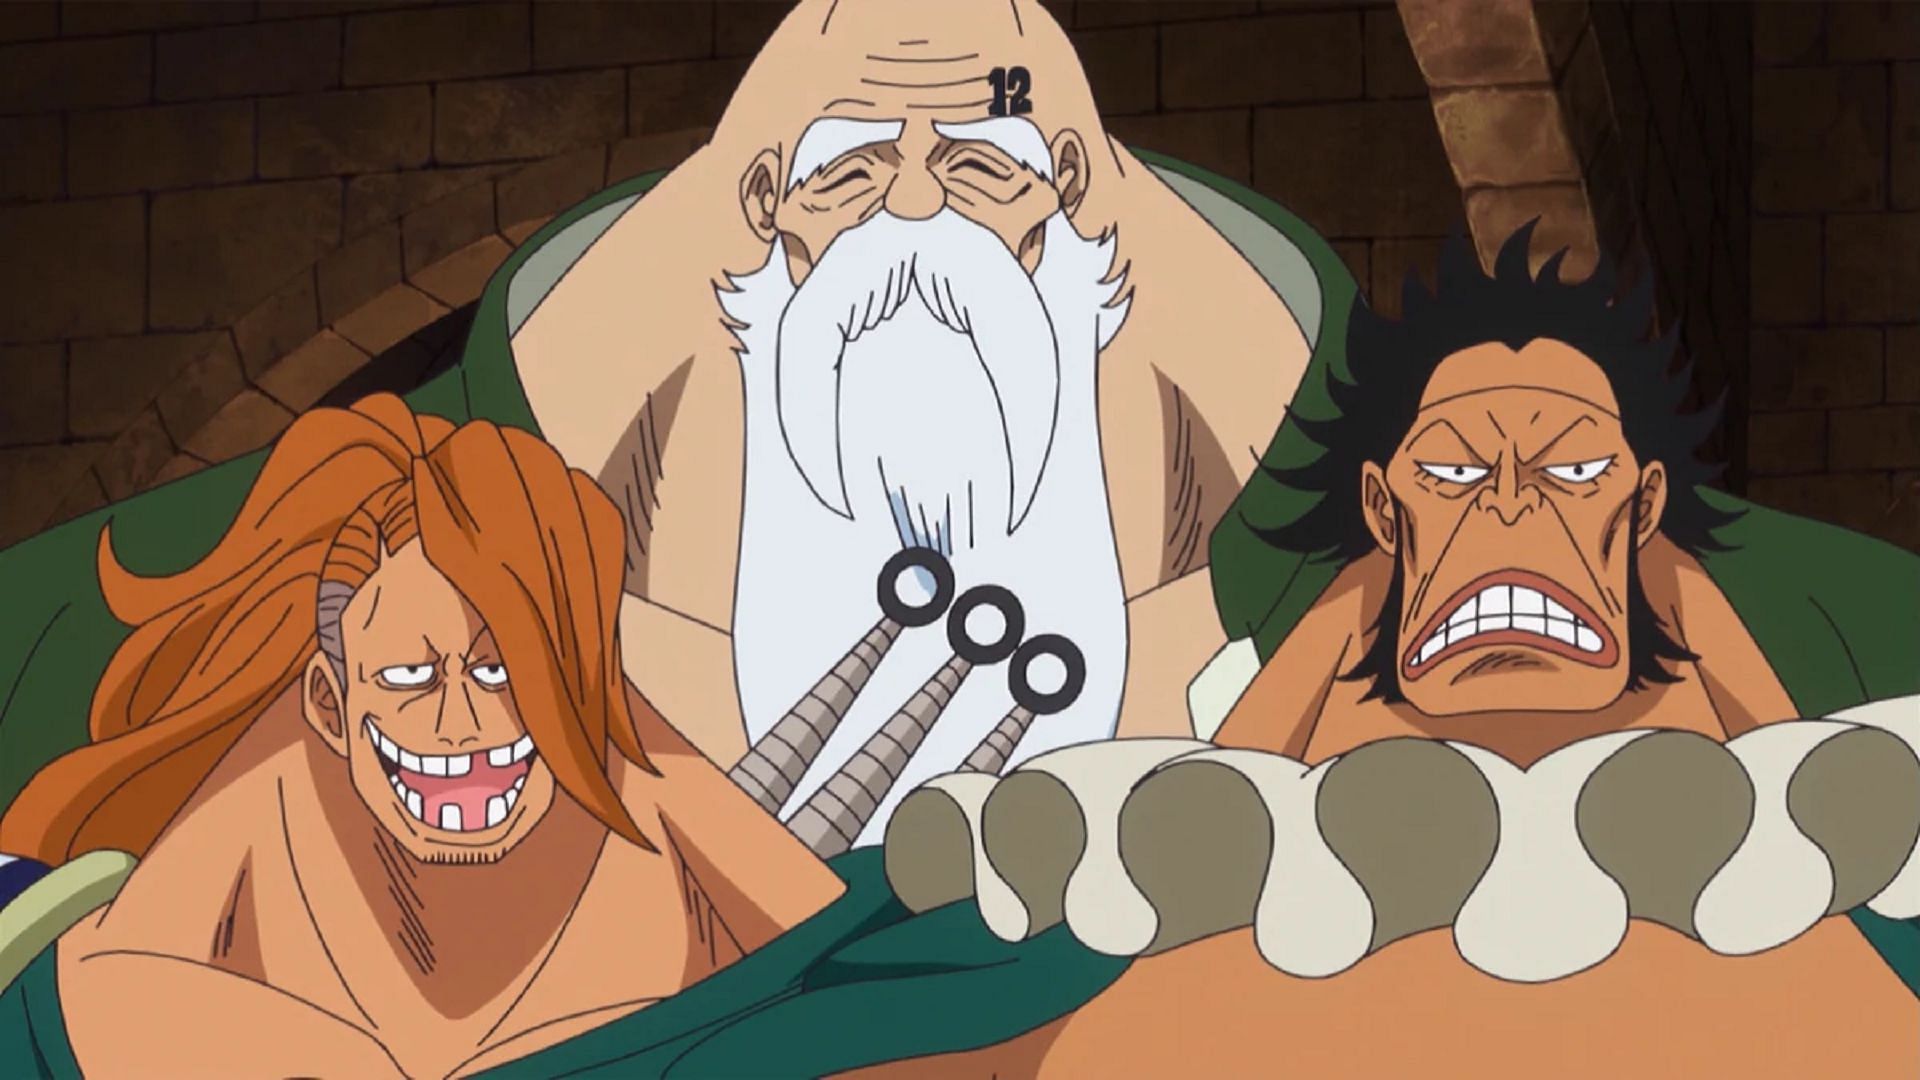 The Chinjao Family in One Piece (Image via Toei Animation, One Piece)